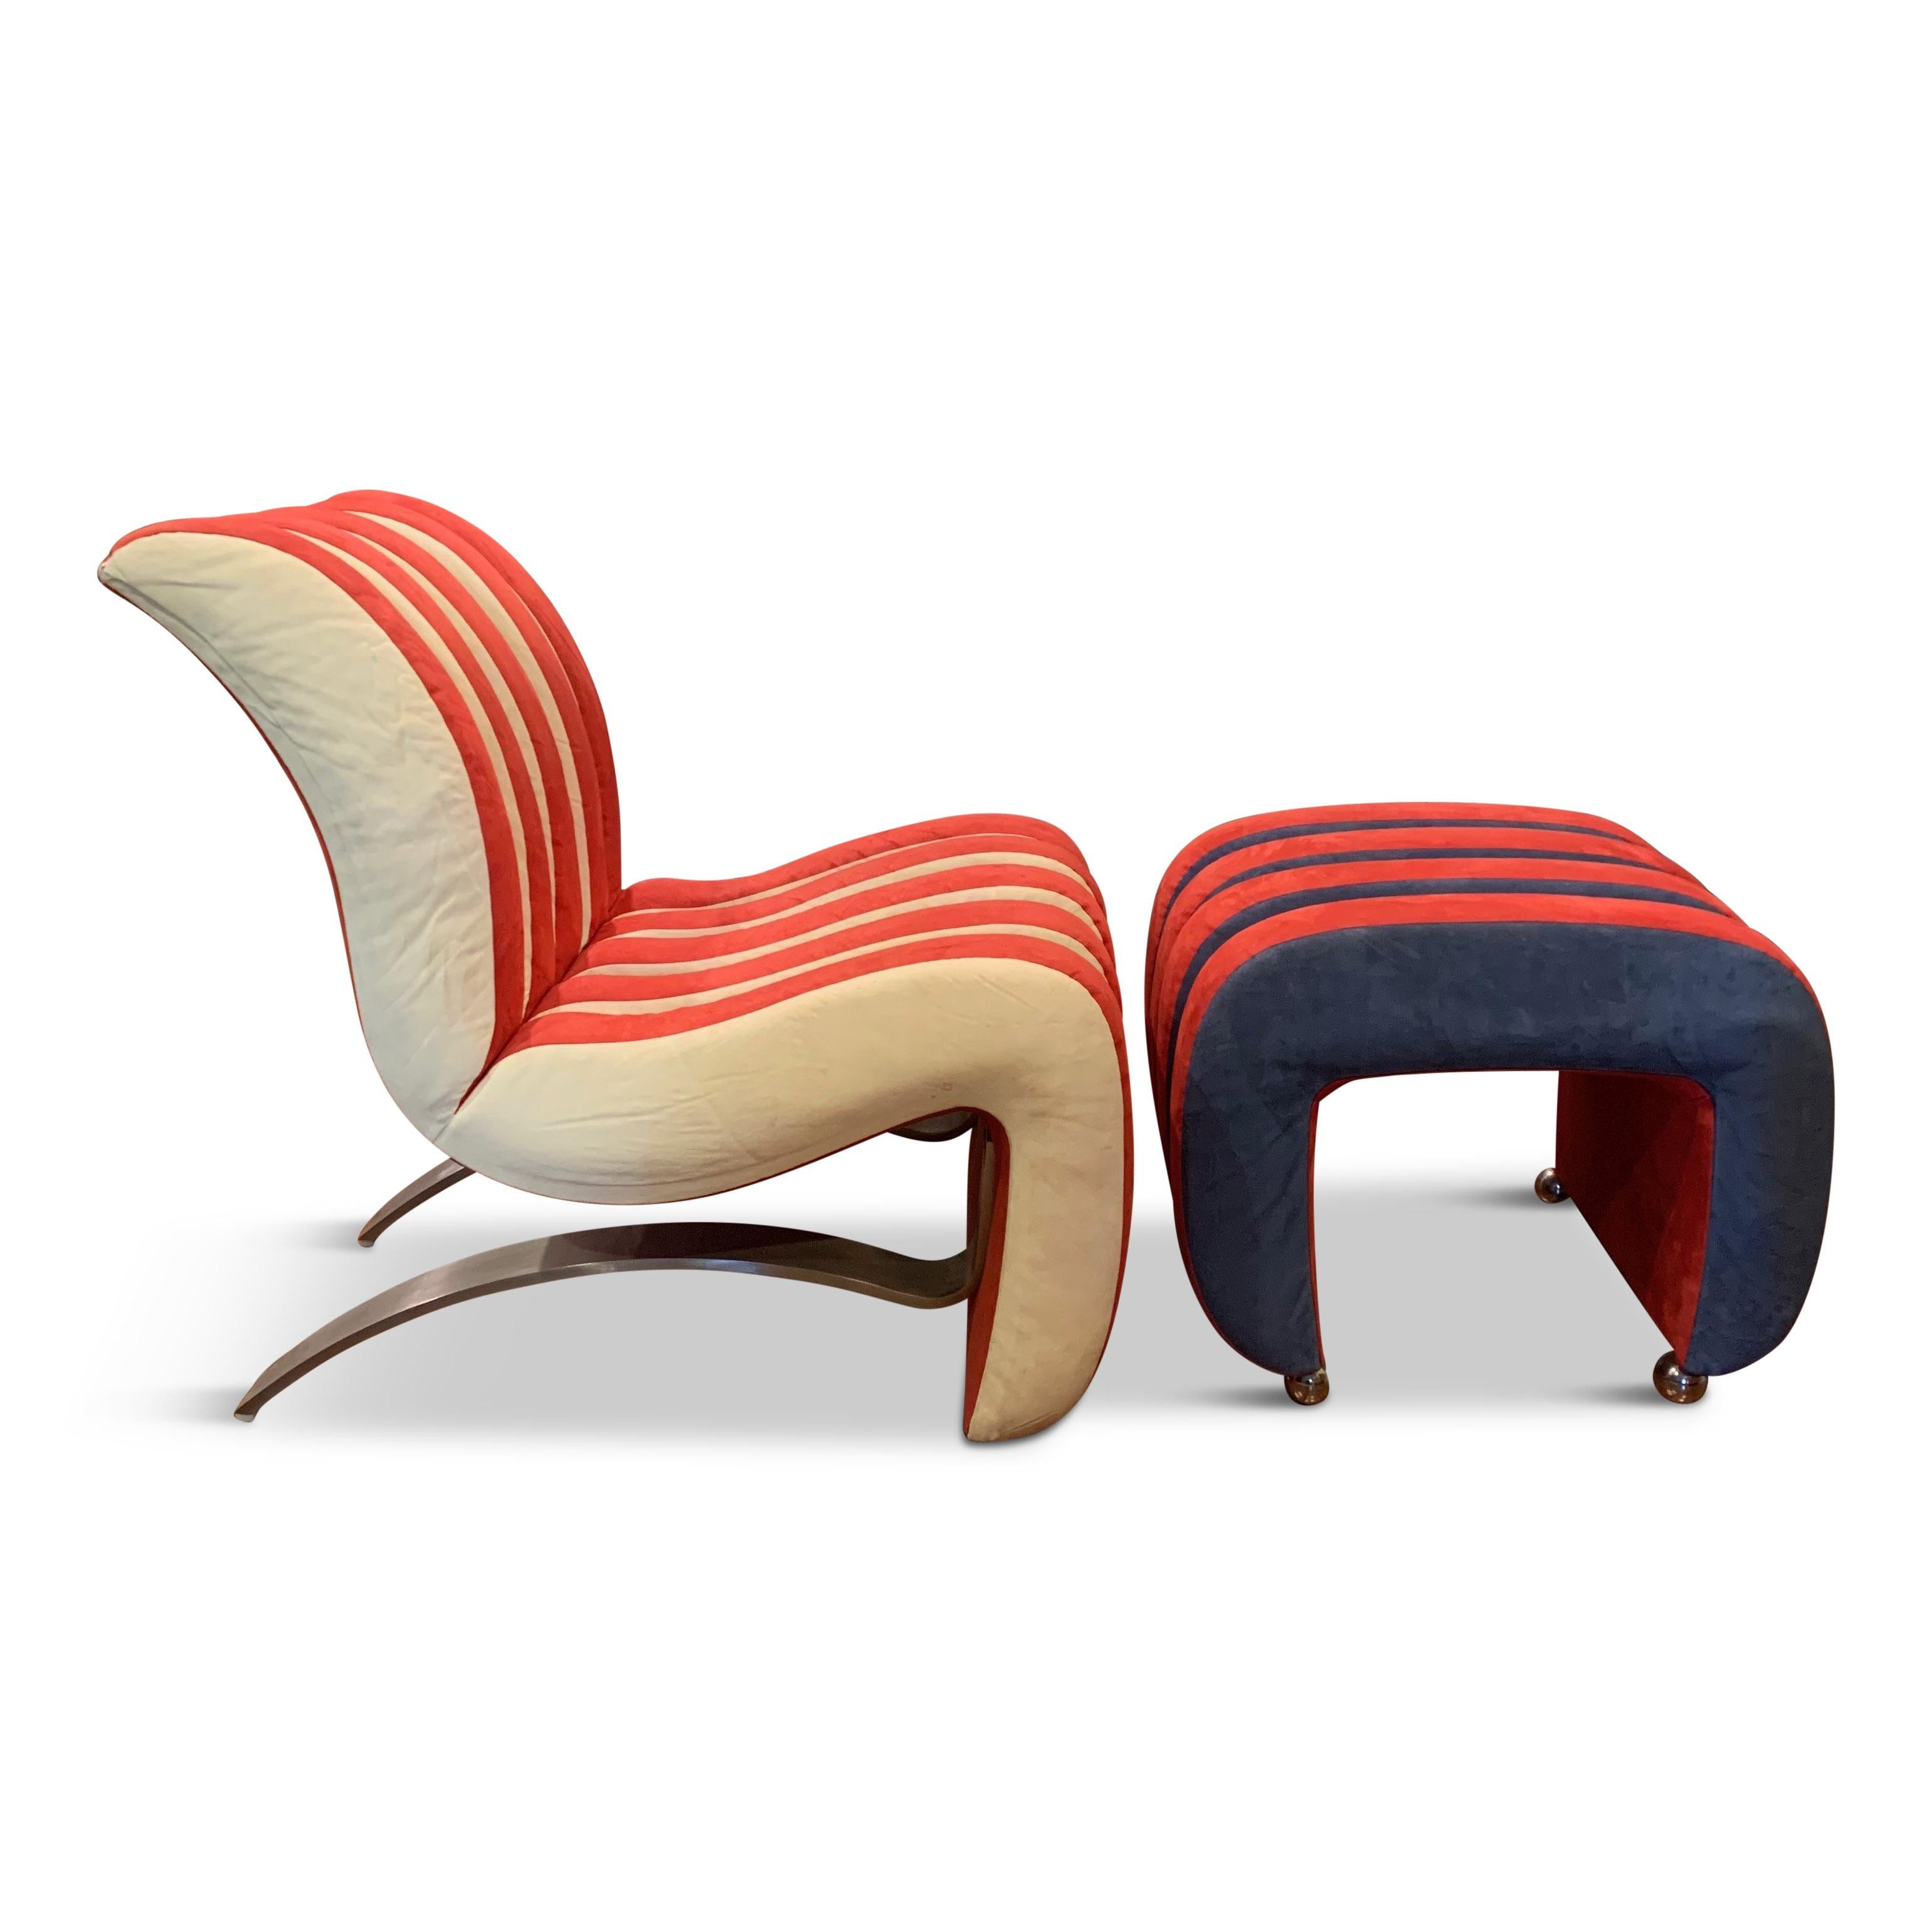 This one of a kind lounge chair upholstered in it's original red, white, and blue suede is an original design by the design duo of Barbara and Robert Tiffany. Created in 2002, this piece with its channeled upholstery and stainless steel legs is